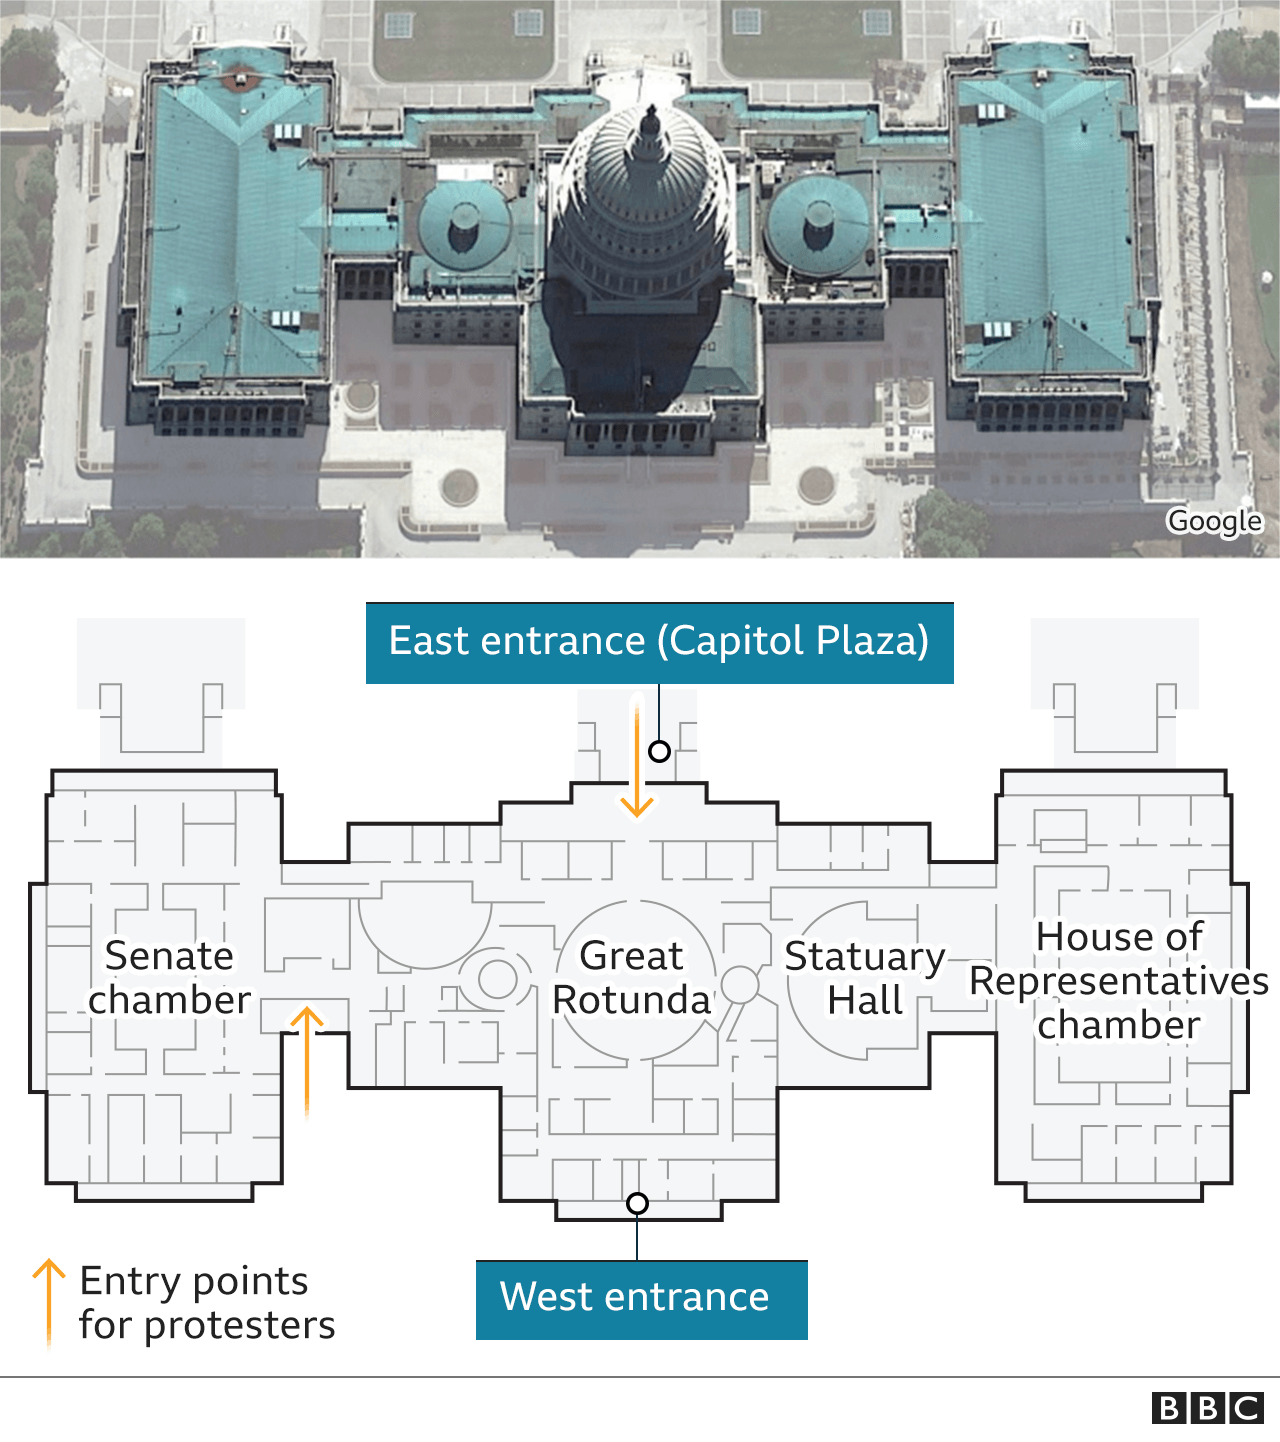 Map showing key locations at the Capitol building